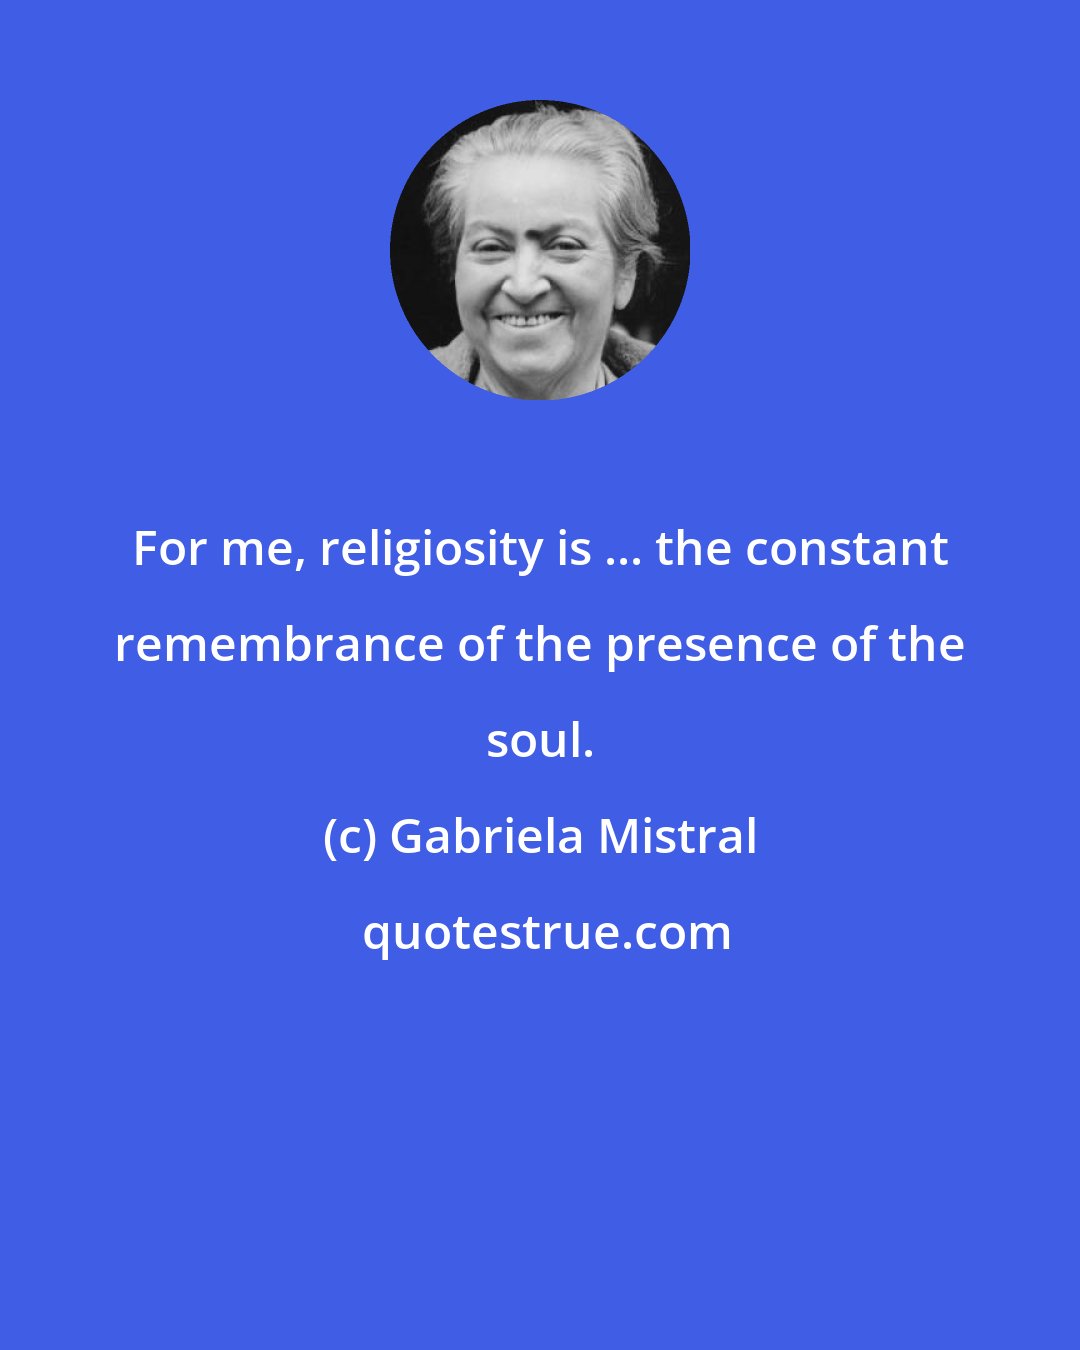 Gabriela Mistral: For me, religiosity is ... the constant remembrance of the presence of the soul.